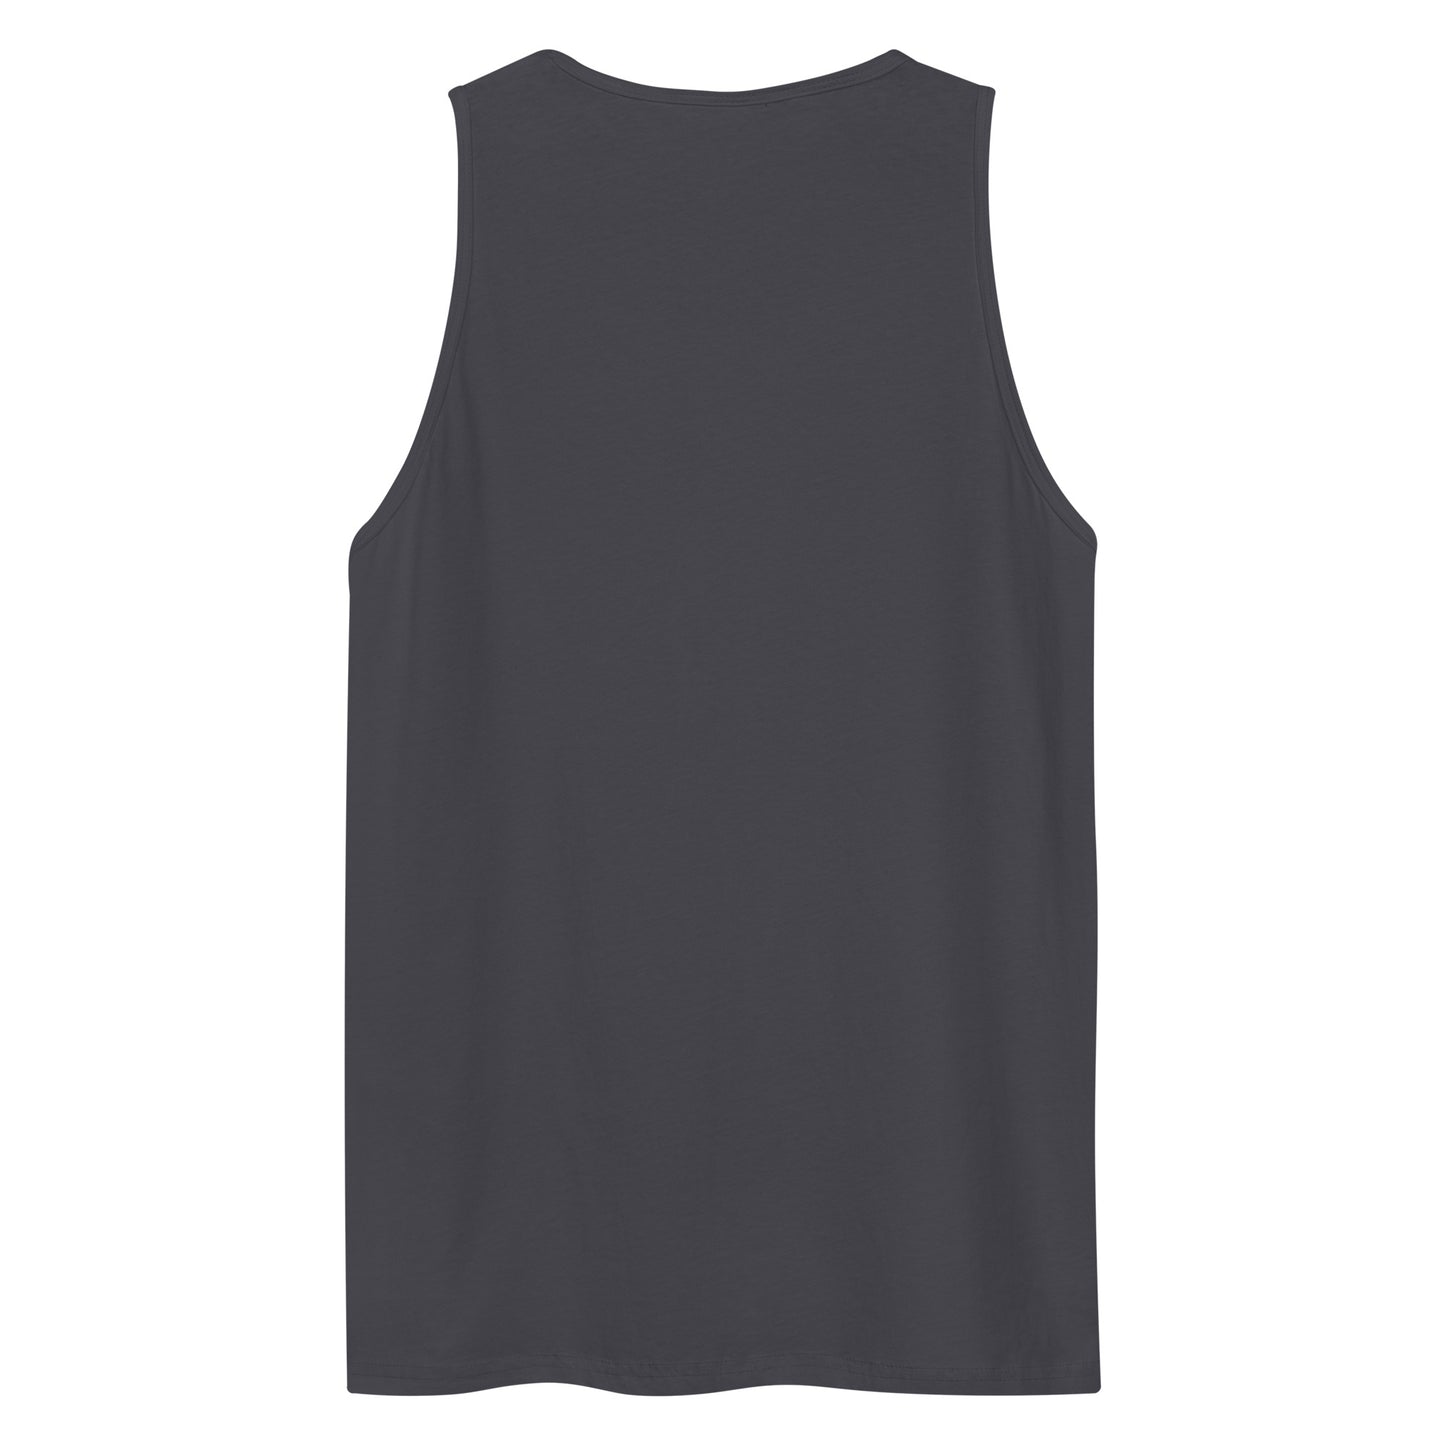 Red Line Firefighters Unsiex Tank Top